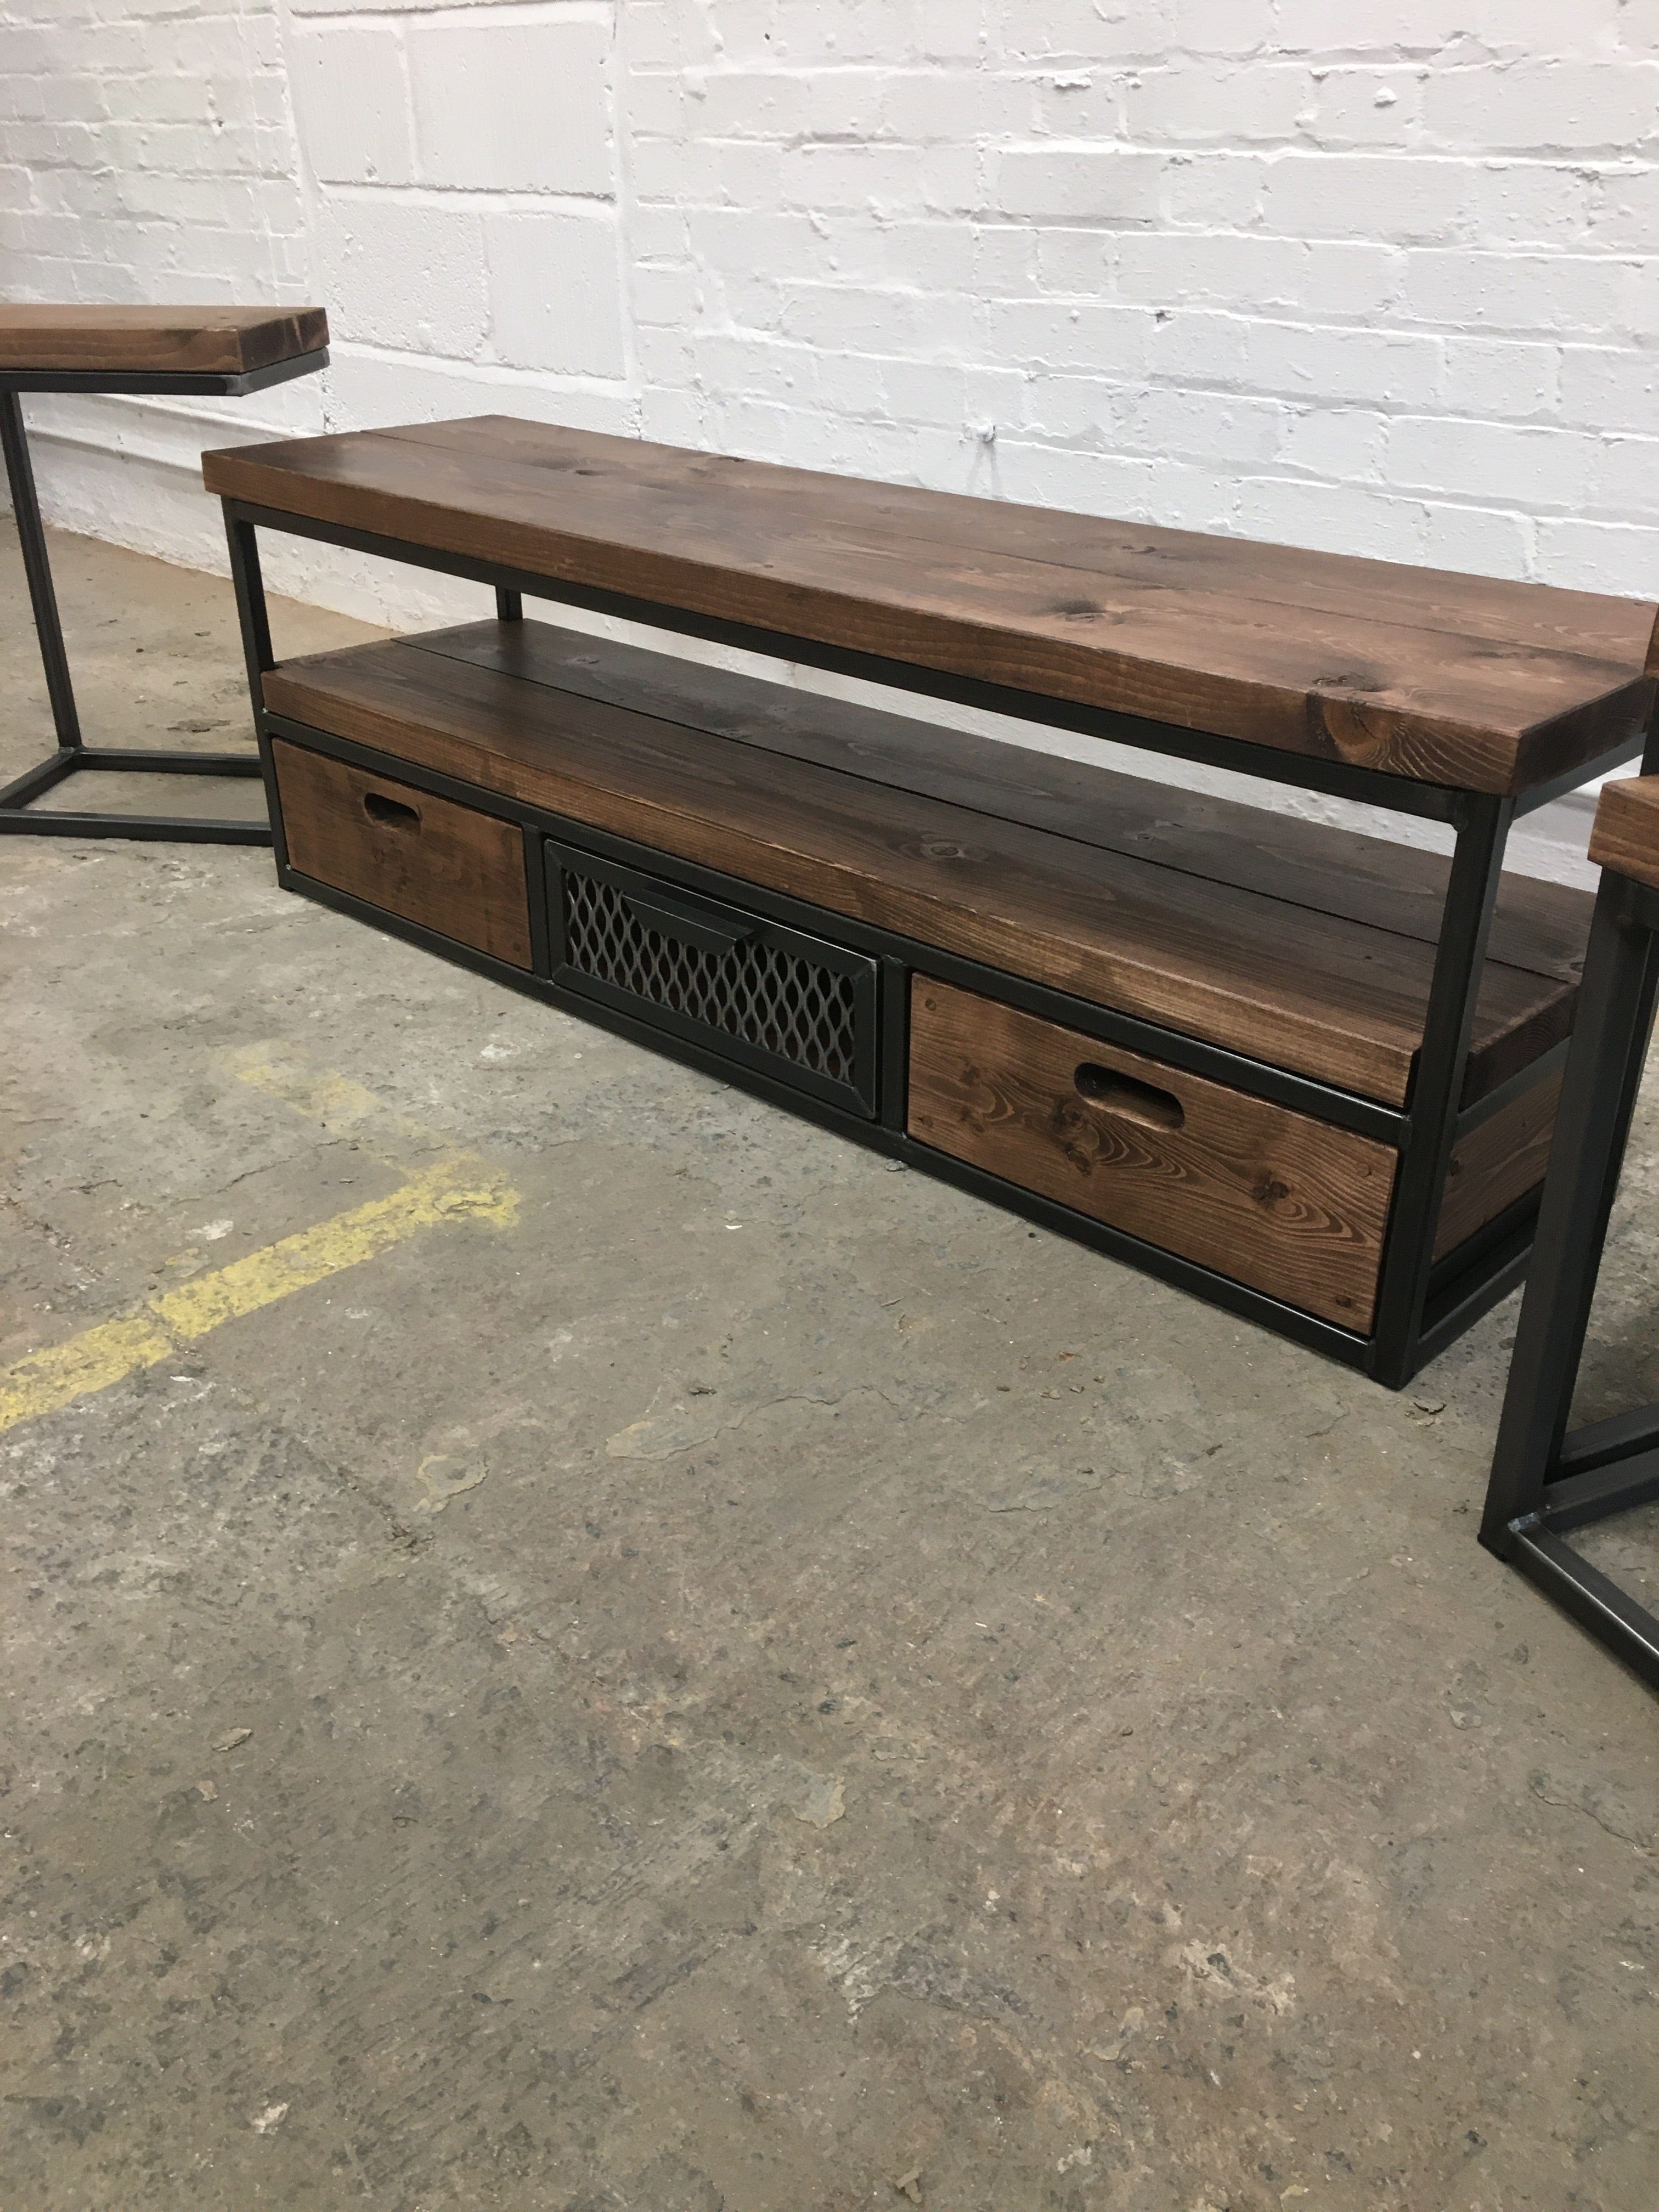 Rustic & Industrial TV Unit Stand with drawers Rustic sofa tables C shaped RSD Furniture   